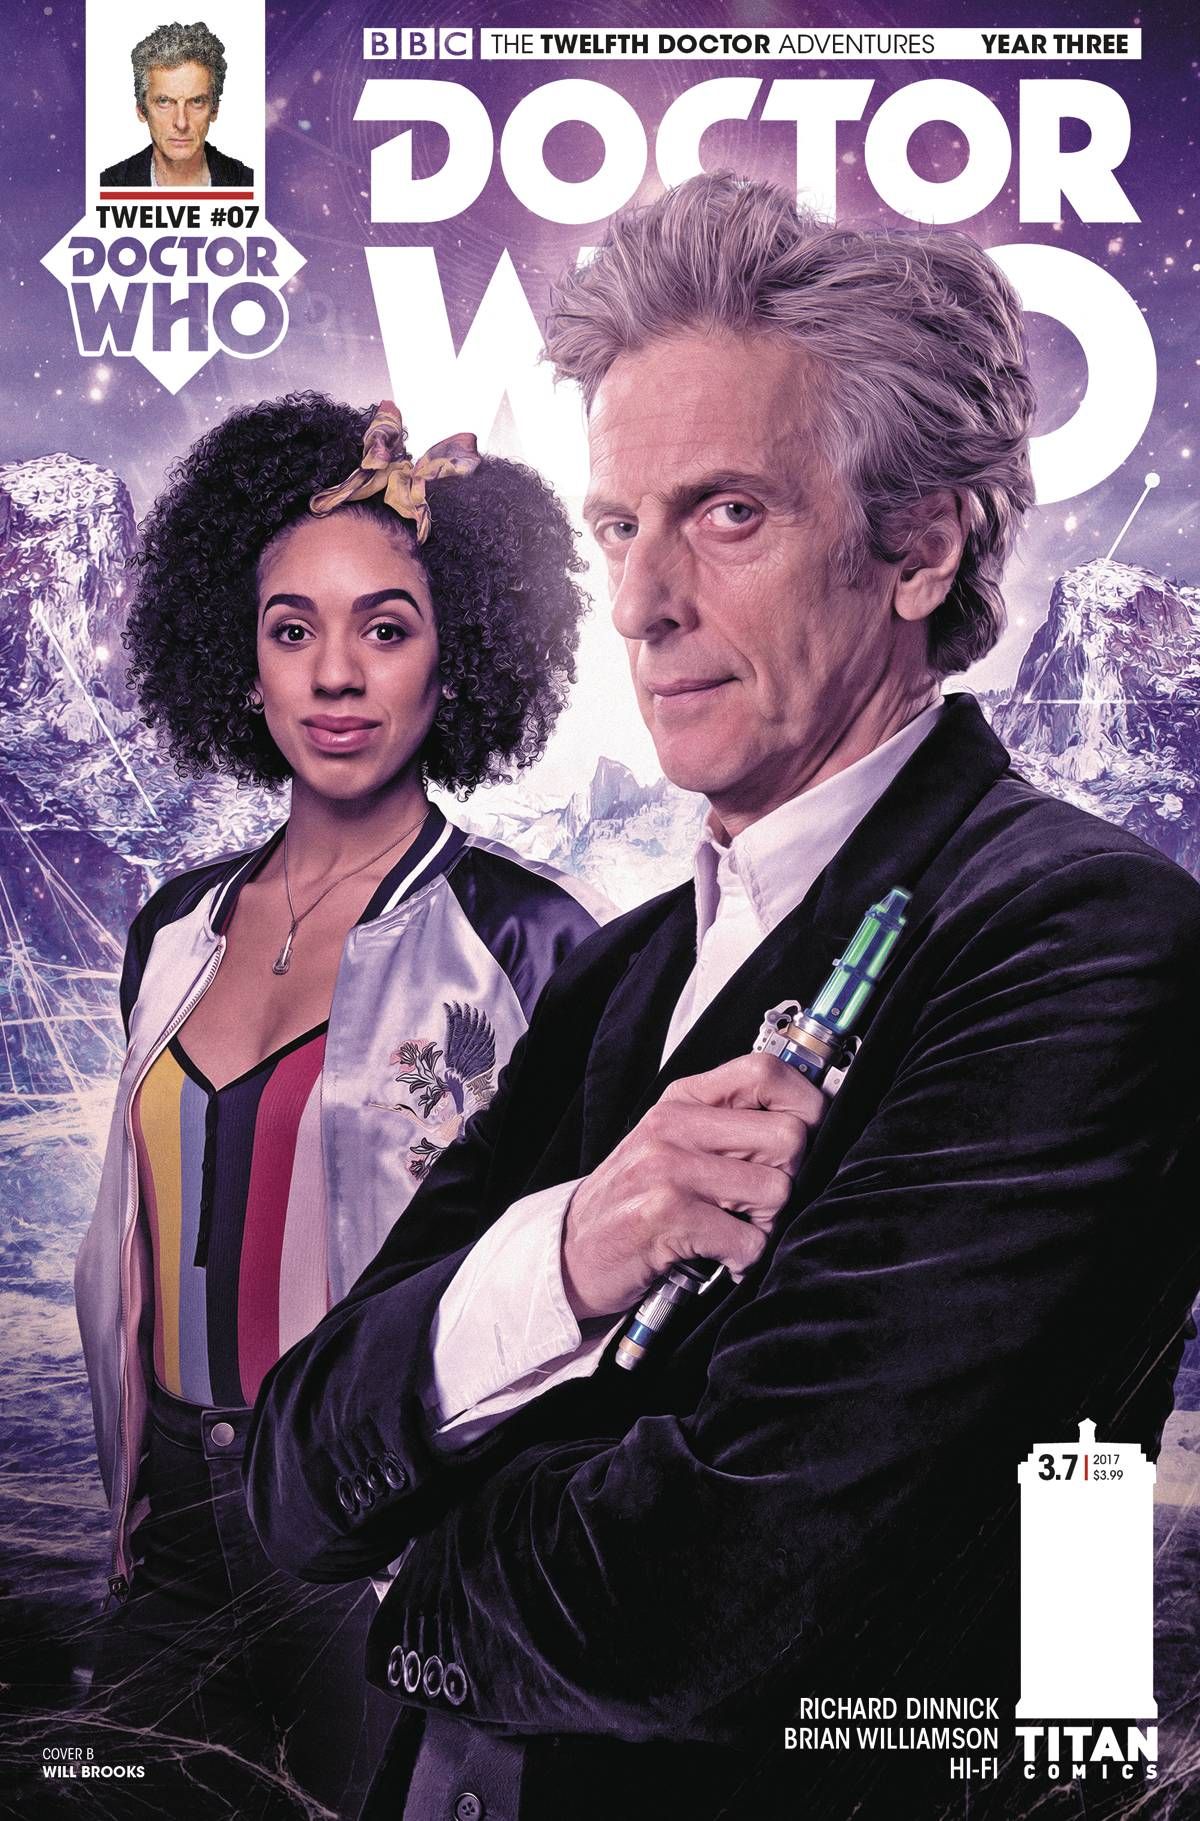 Doctor Who: The Twelfth Doctor Year Three Comic